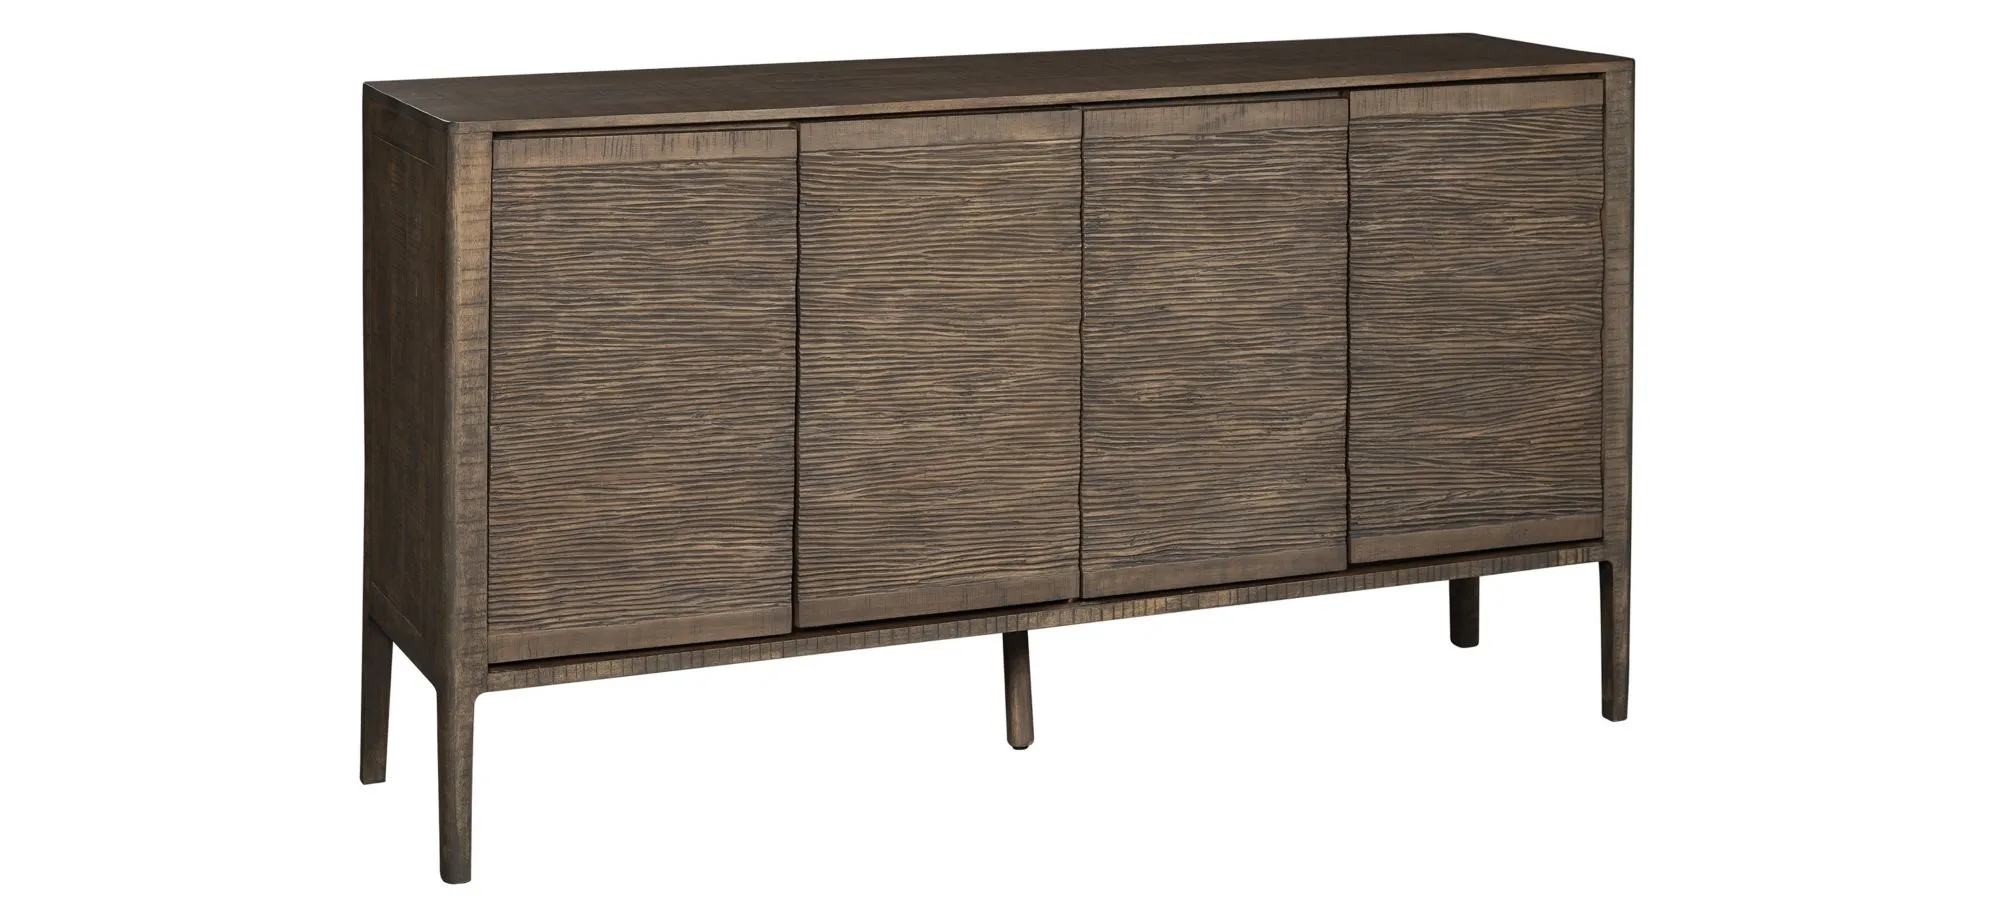 Wadsworth Entertainment Console in SPECIAL RESERVE by Hekman Furniture Company